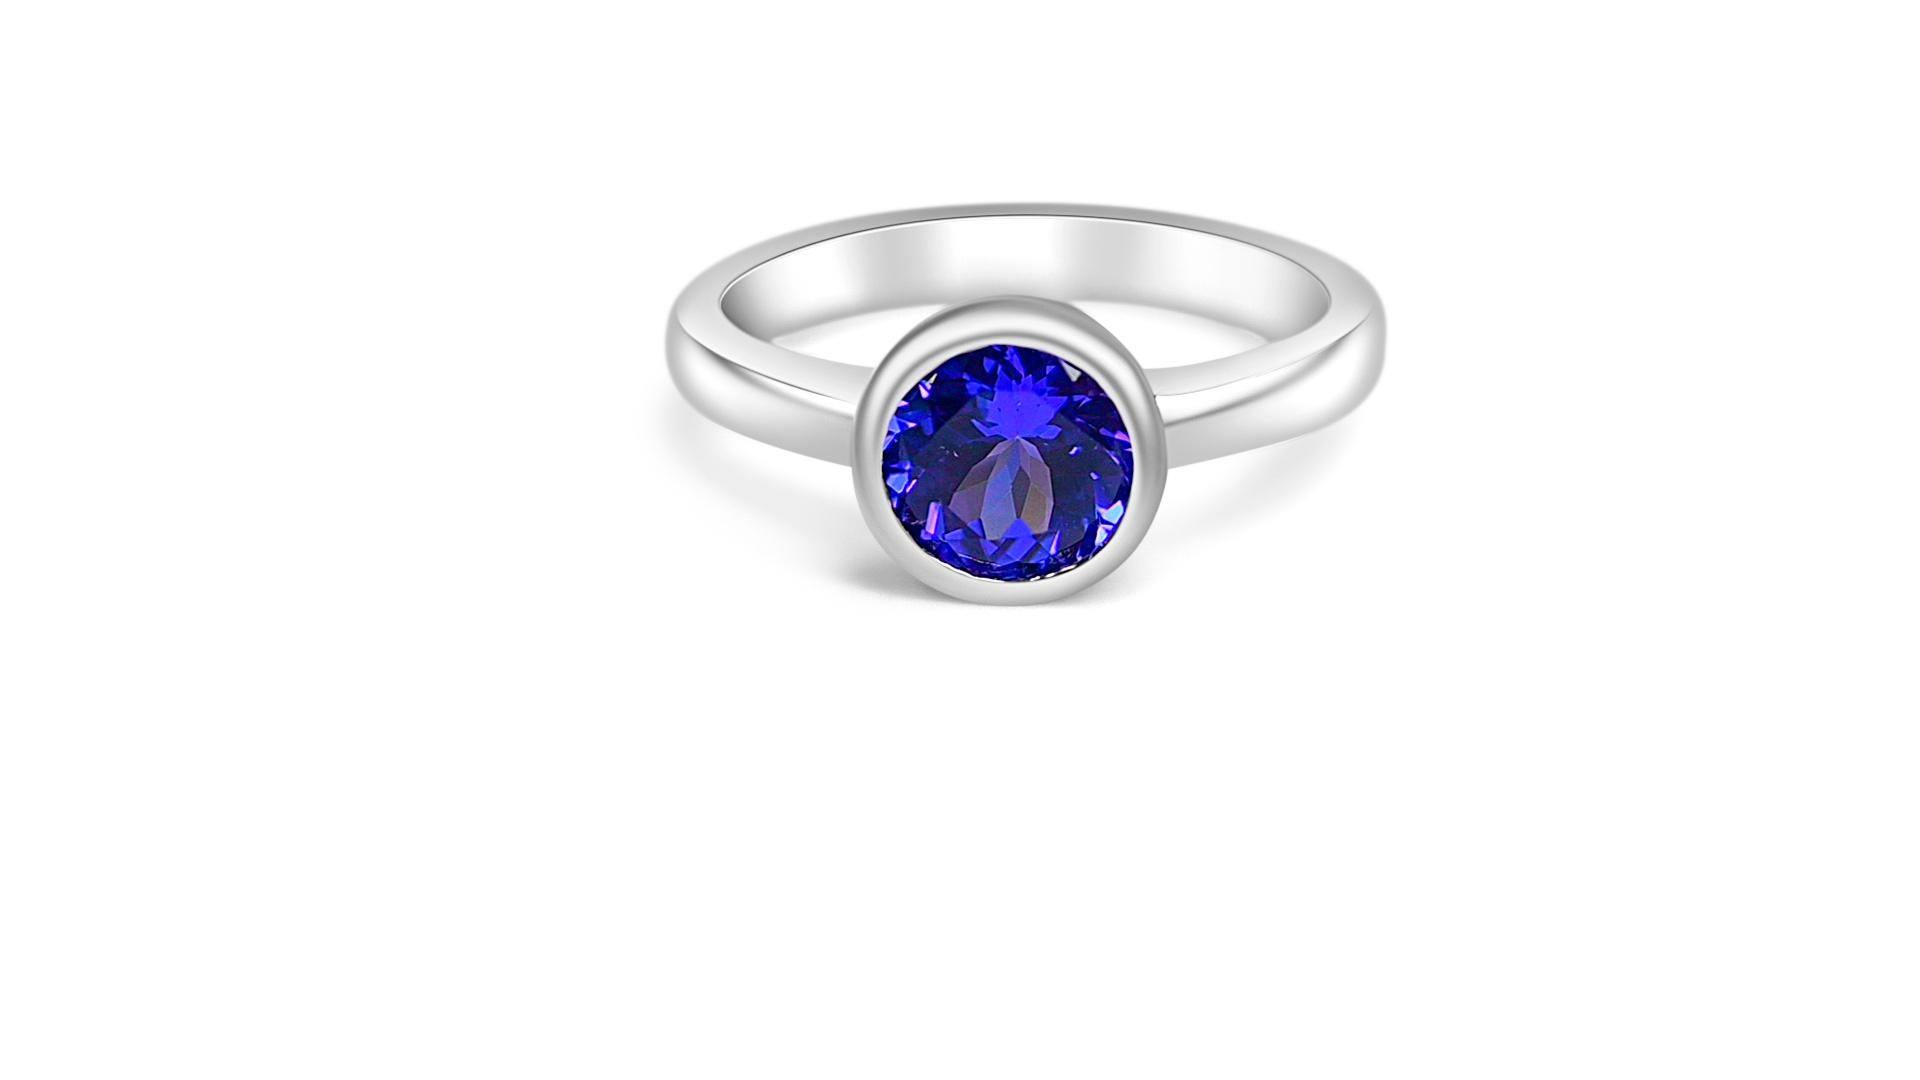 Welcome to Blue Star Gems NY LLC ! Discover popular engagement ring & wedding ring designs from classic to vintage inspired. We offer Joyful jewelry for everyday wear. Just for you. We go above and beyond the current industry standards to offer